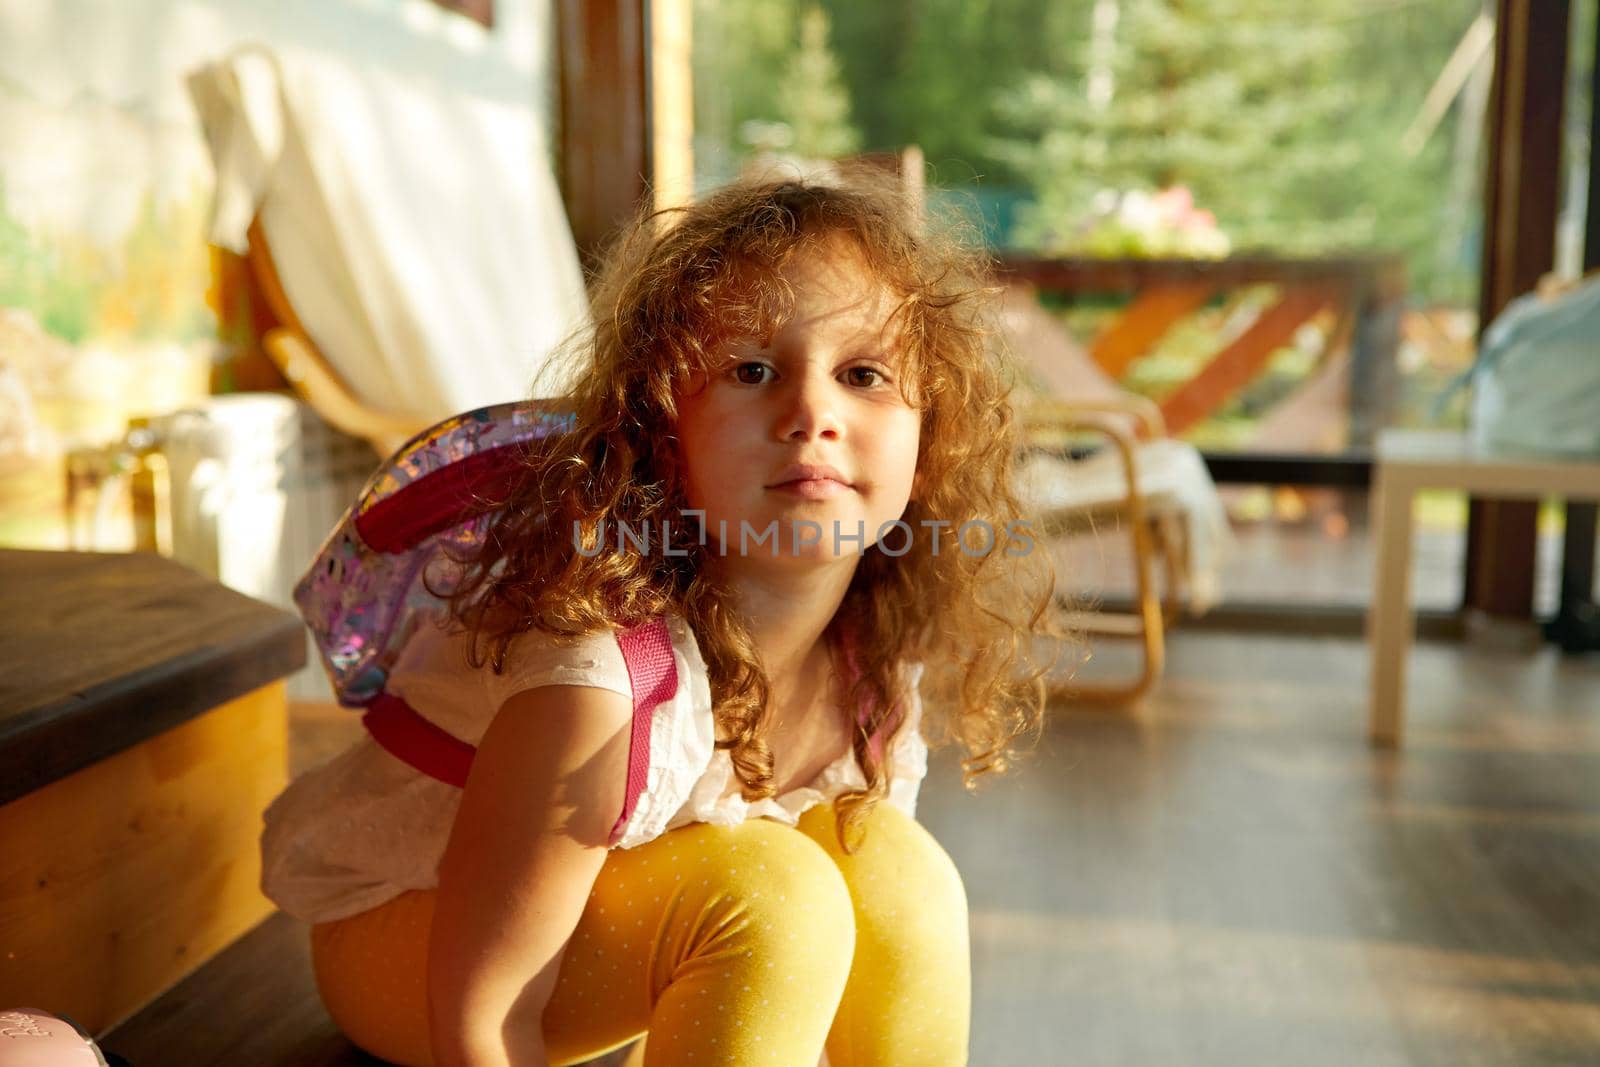 Adorable girl with backpack bending forward and looking at camera while sitting on steps in light room on weekend day. Child with a backpack going to school